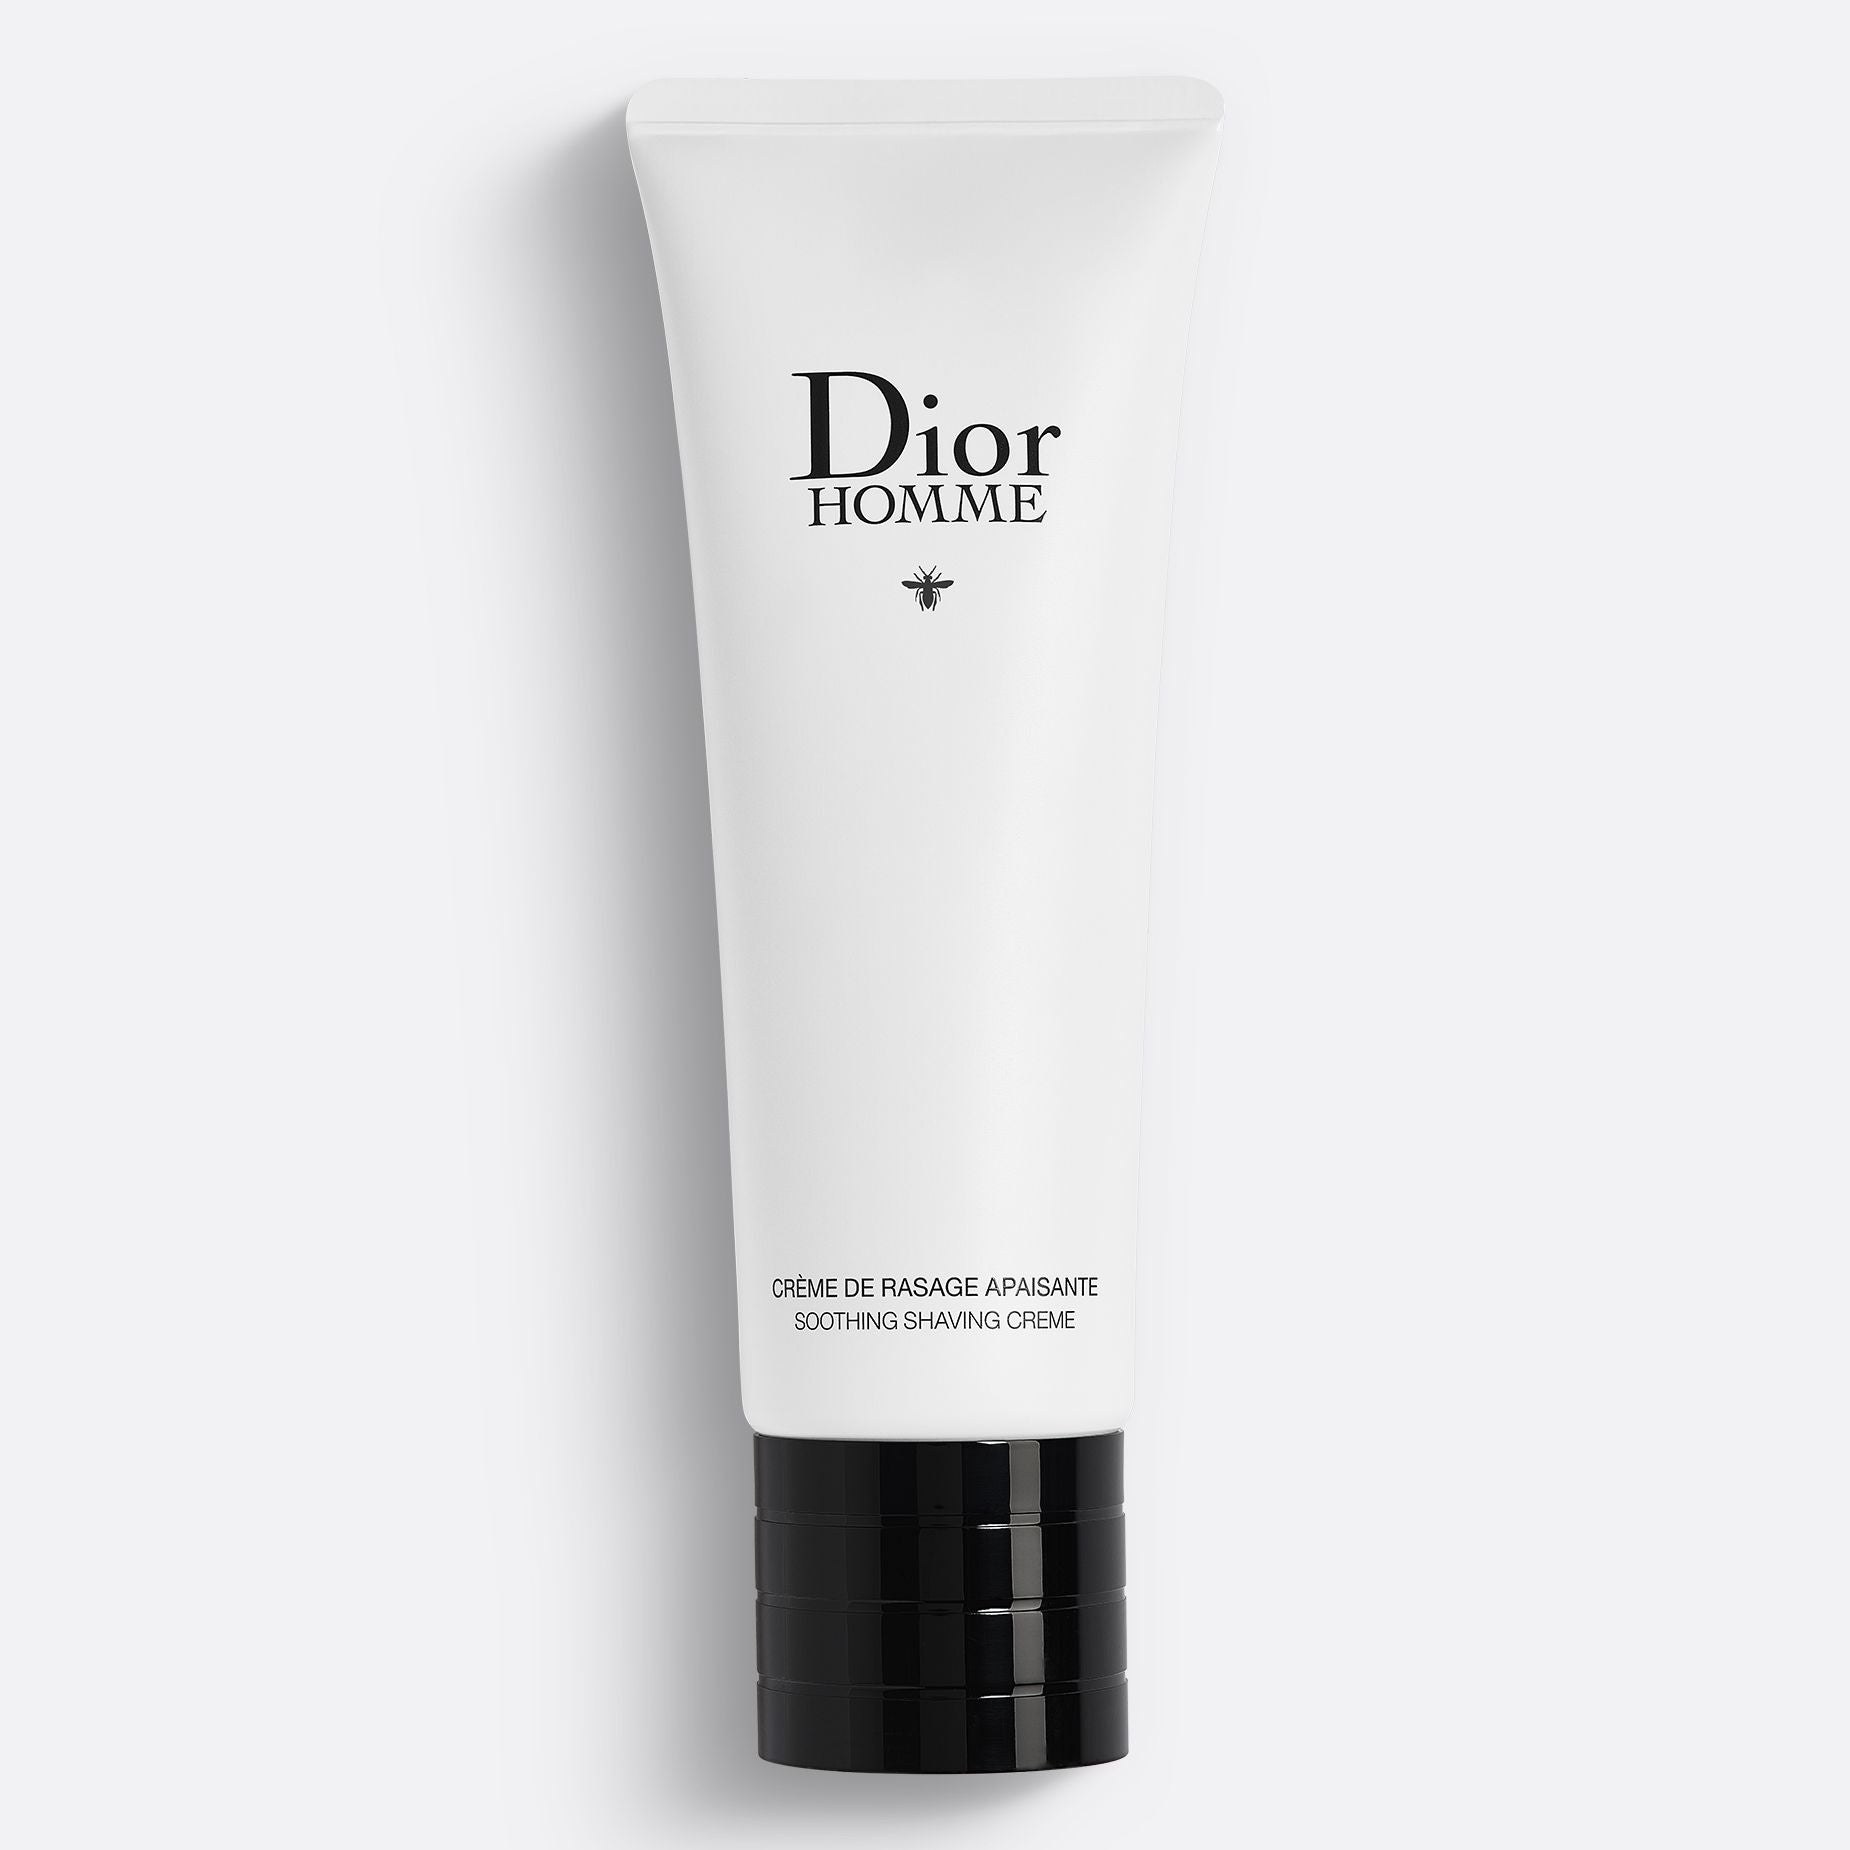 DIOR HOMME SOOTHING SHAVING CREME ~ Shaving Cream